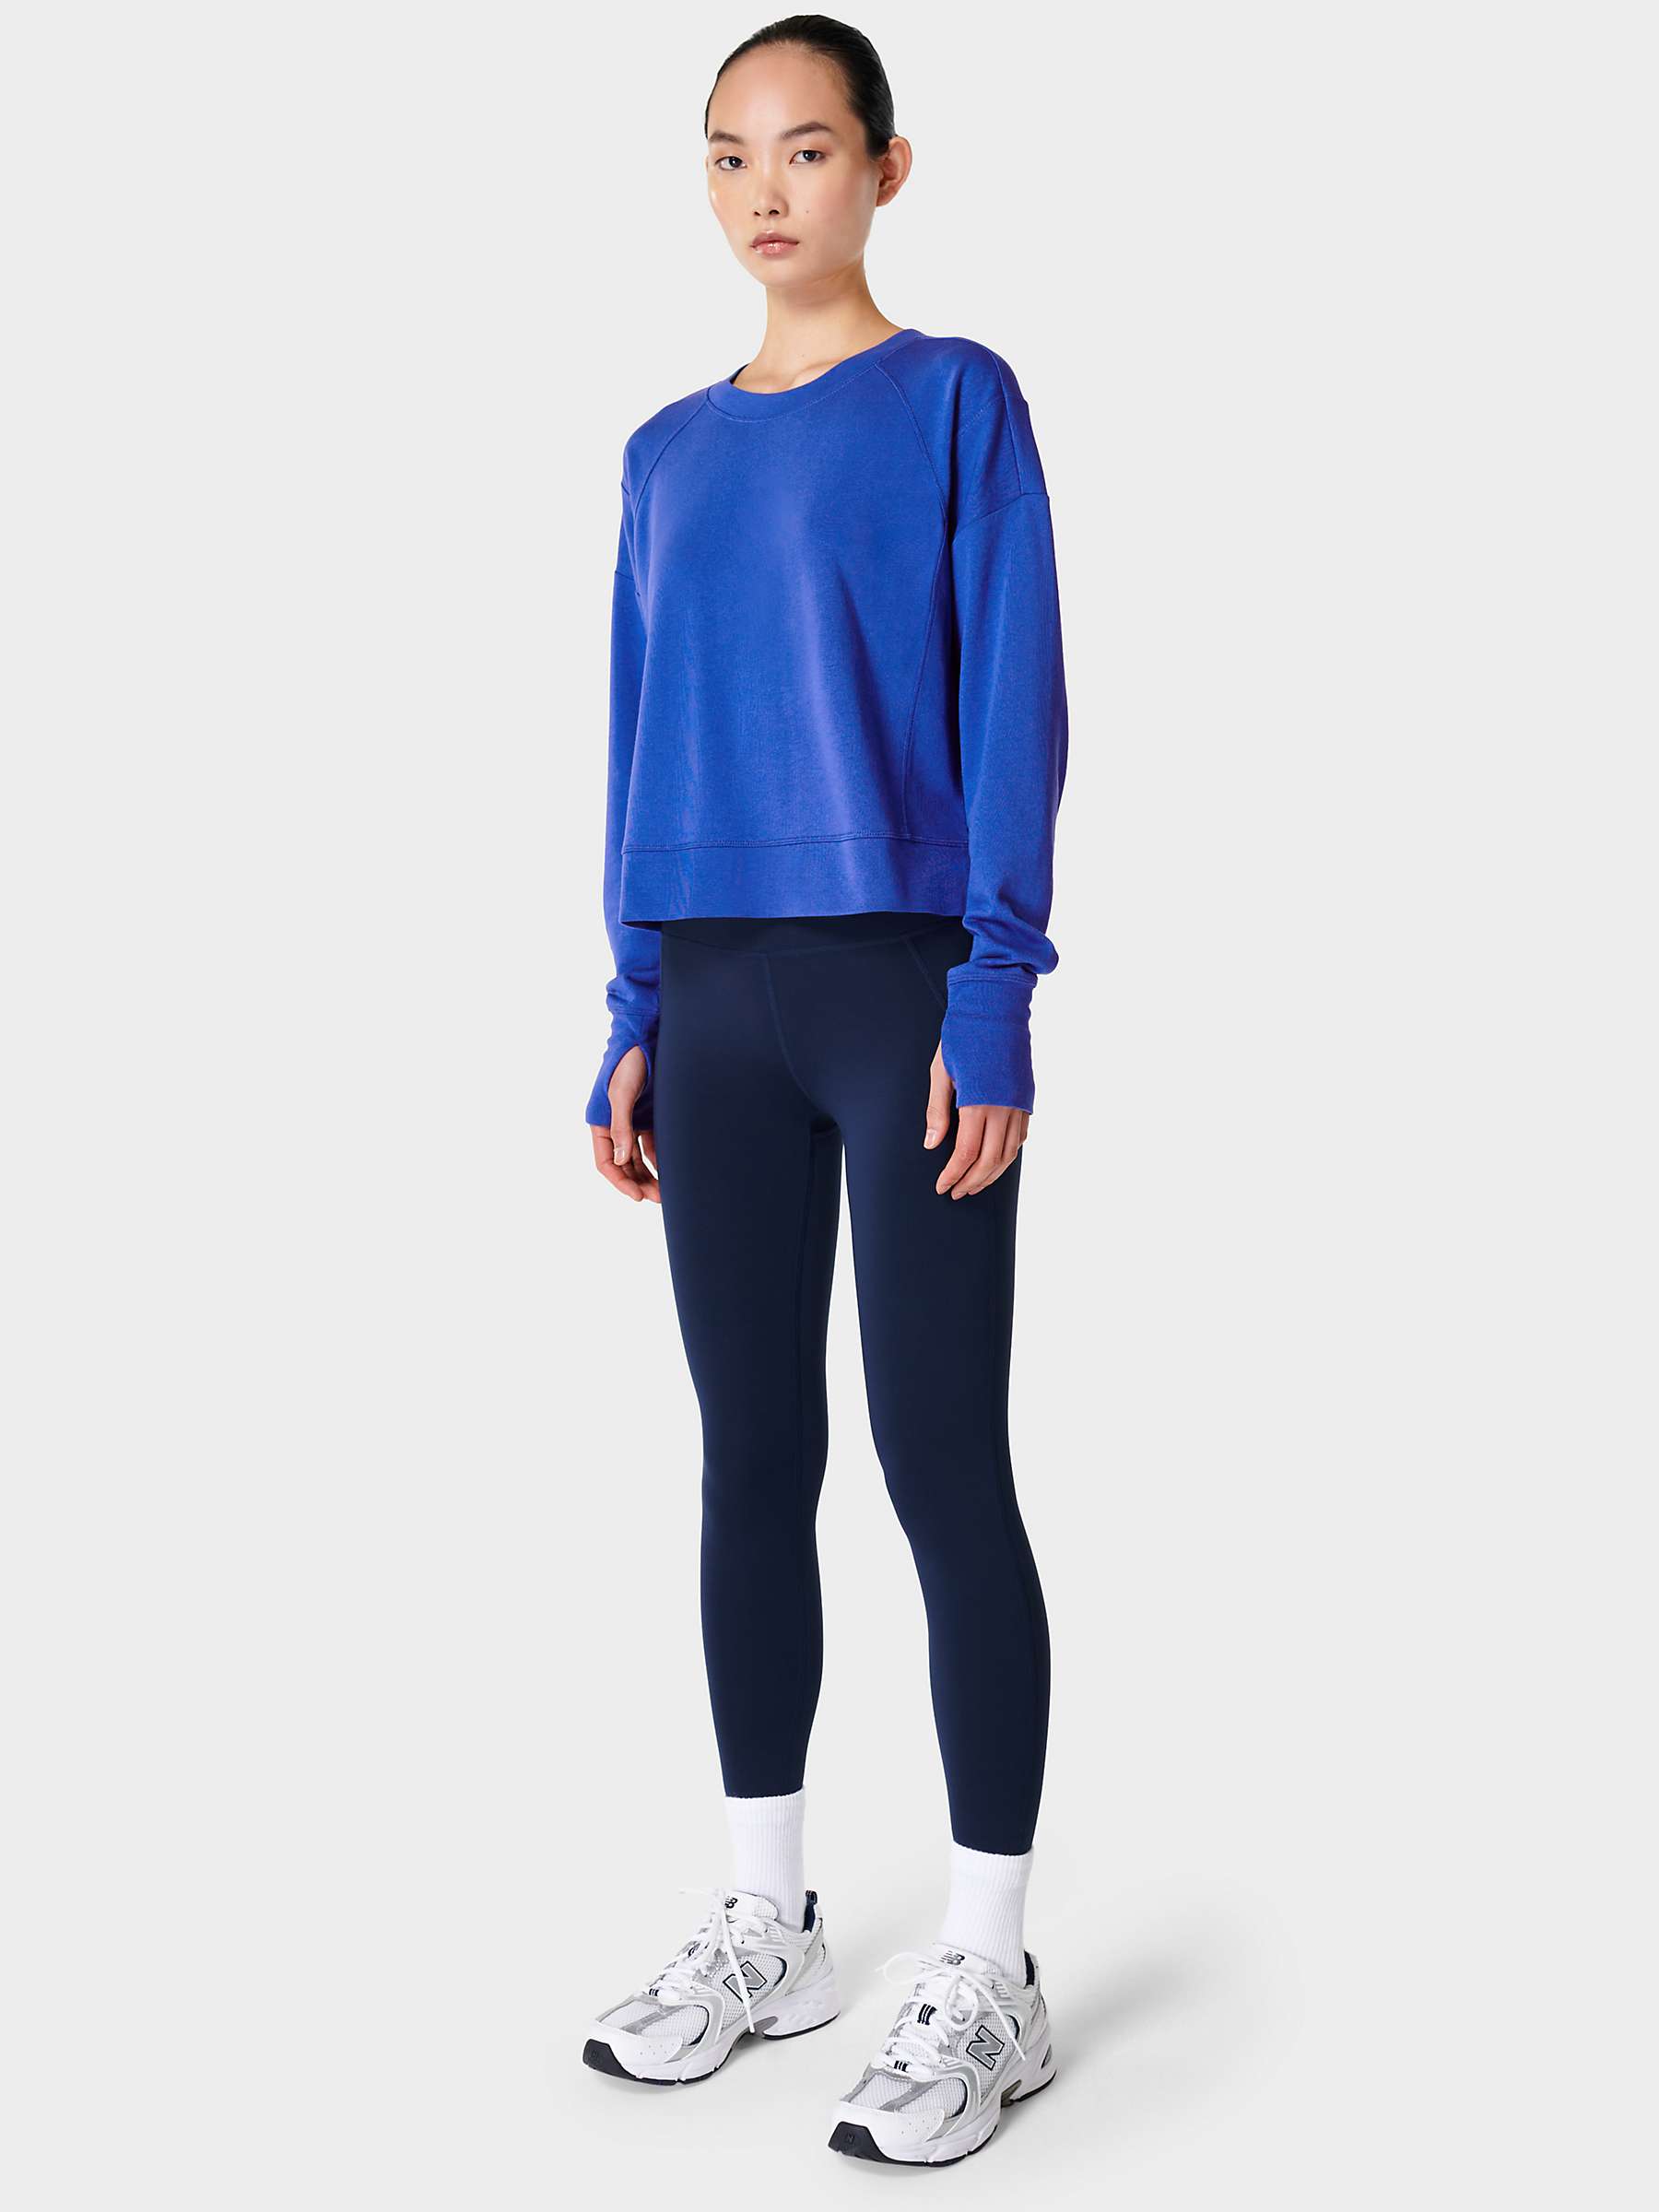 Buy Sweaty Betty All Day 7/8 Leggings Online at johnlewis.com